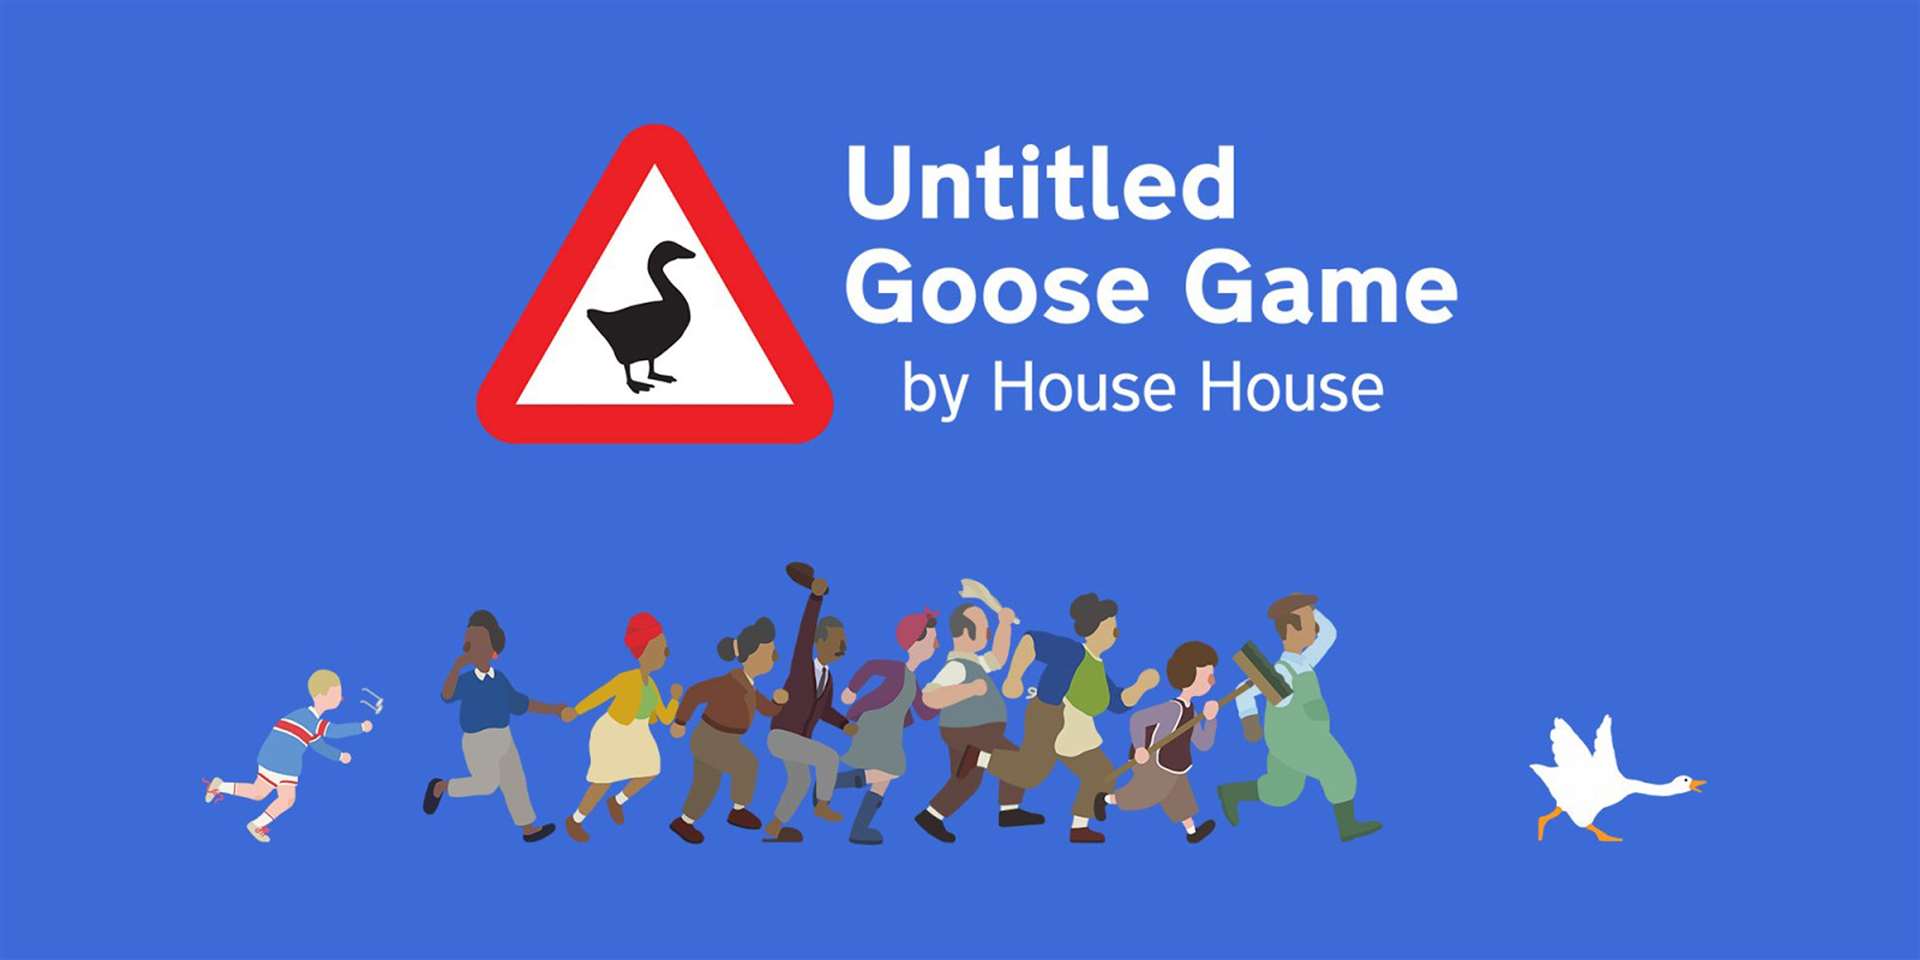 Untitled Goose Game. Picture: Handout/PA